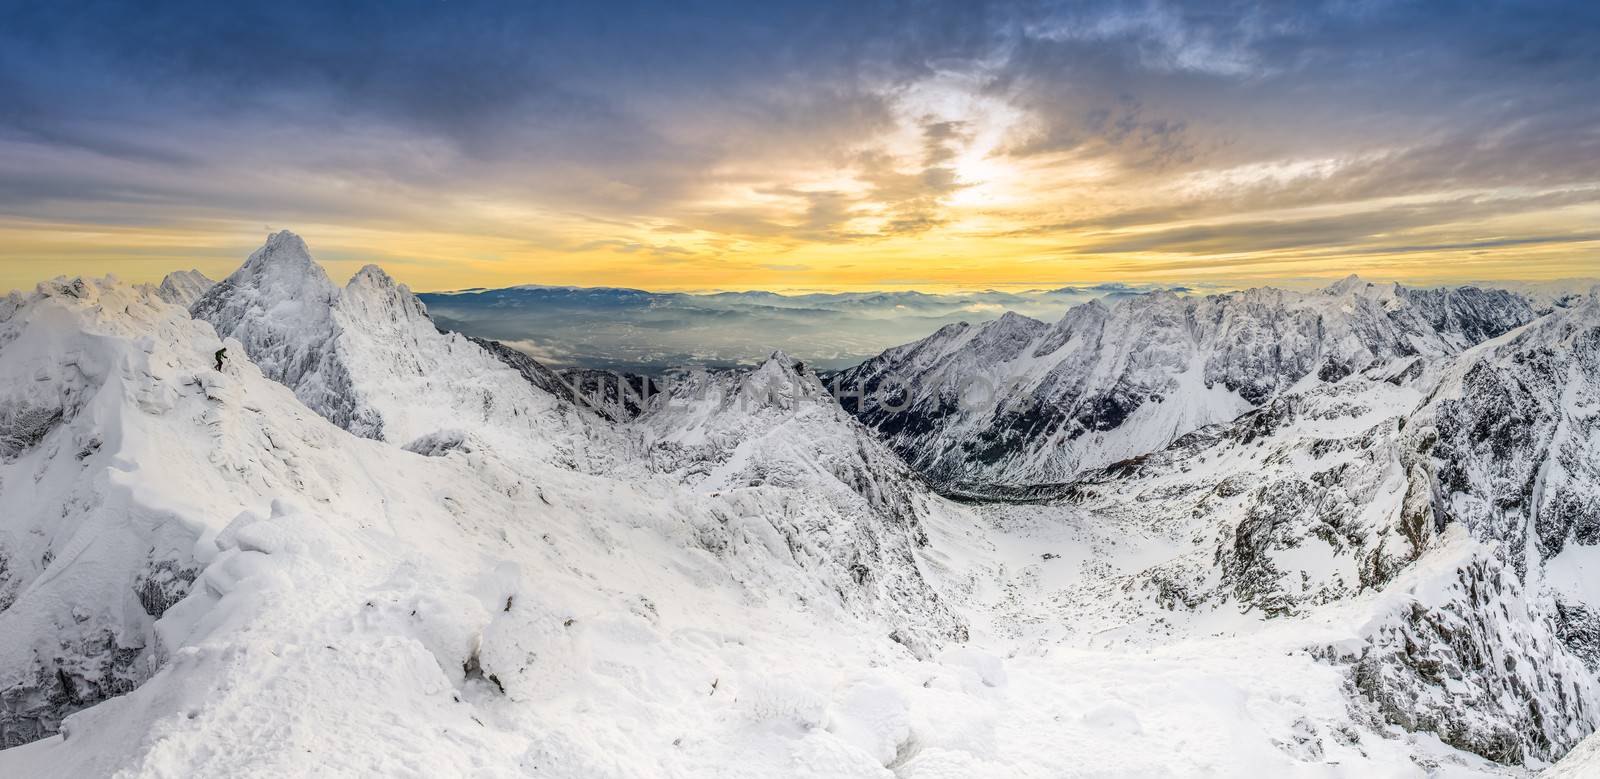 Panoramic view of winter mountains at sunset by martinm303